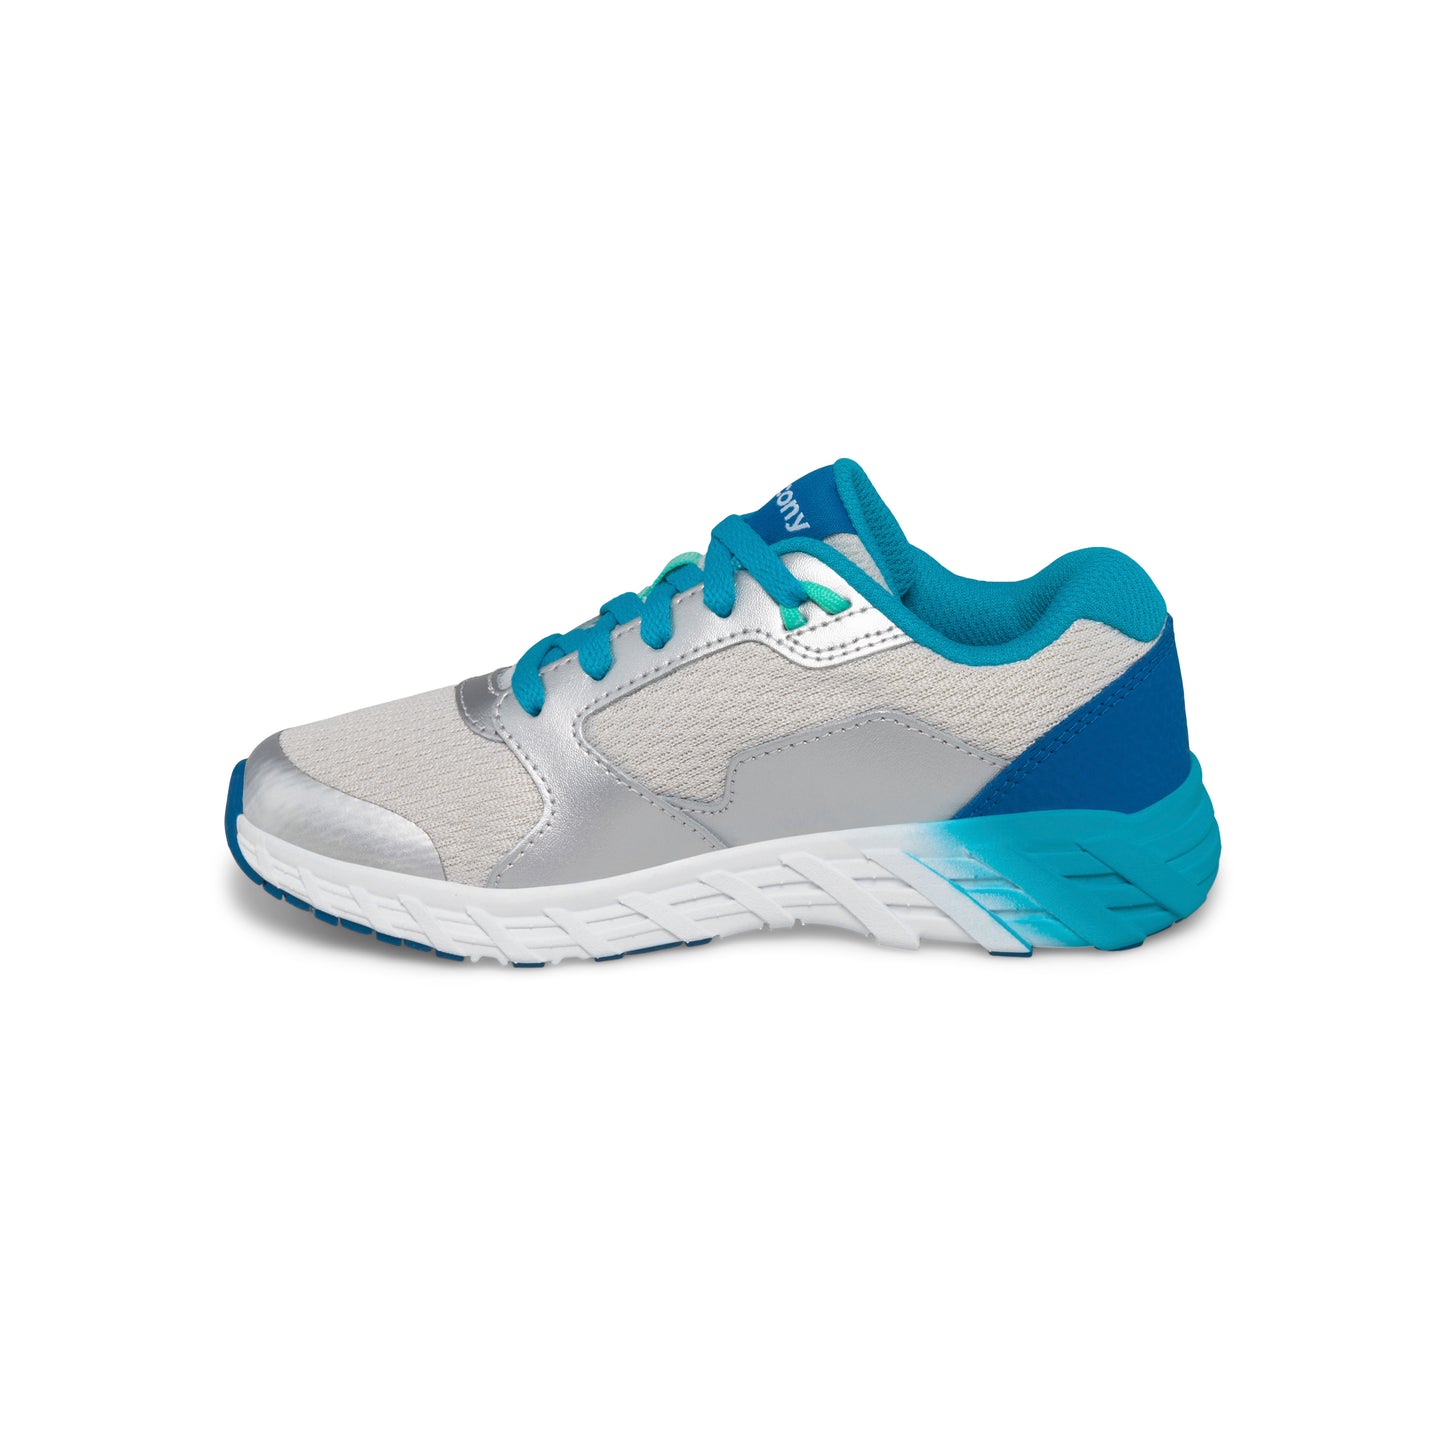 wind-20-sneaker-bigkid-turquoise-silver__Turquoise/Silver_4